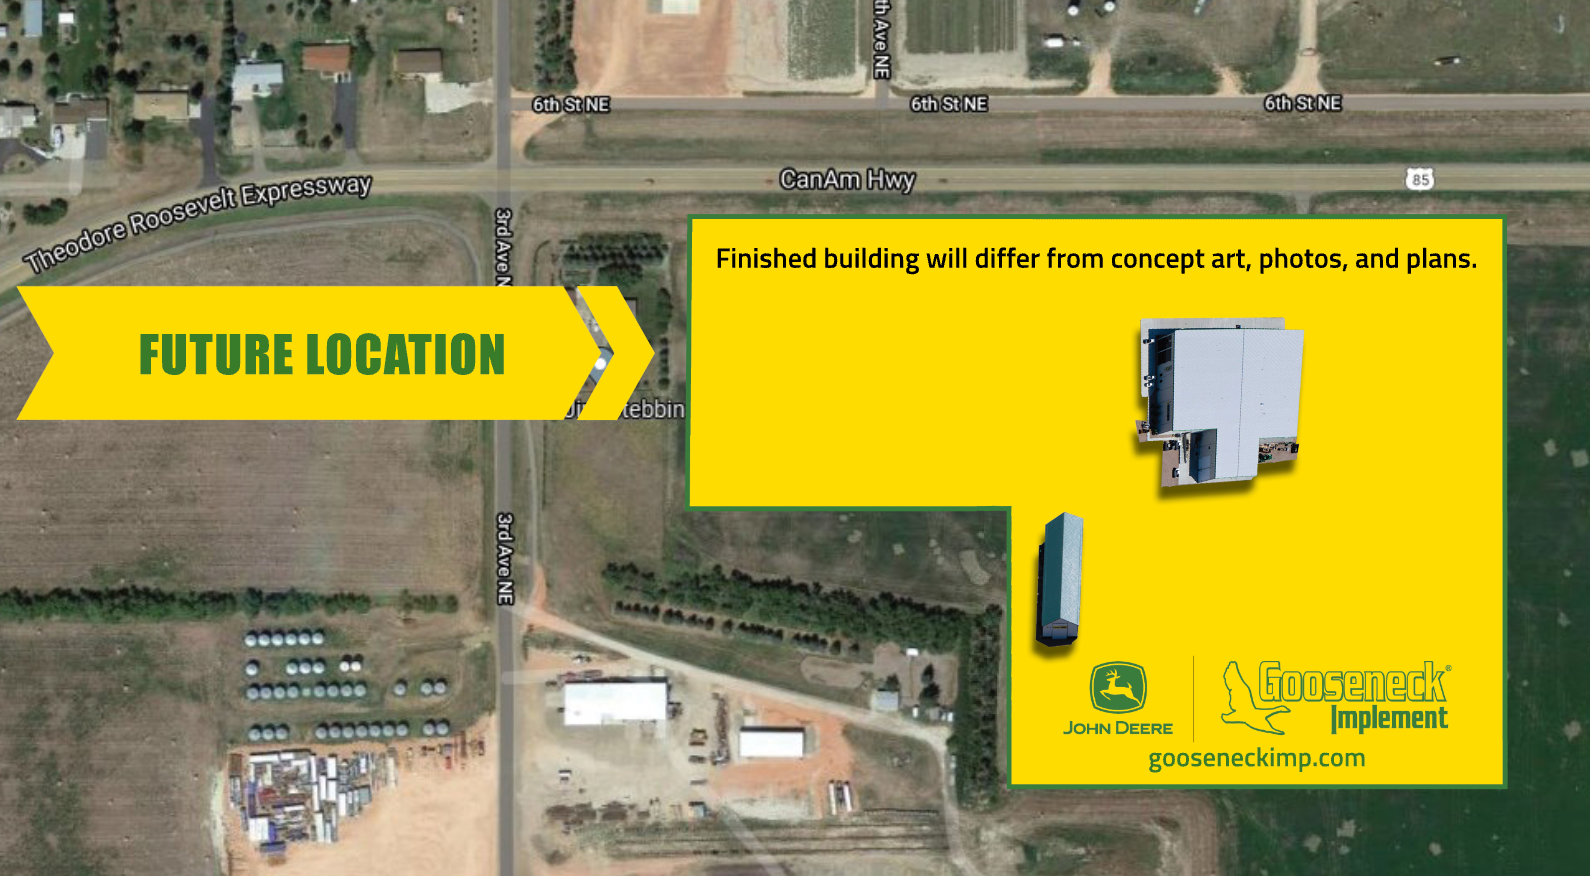 Location map of the new Bowman, North Dakota location of Goosneck Implement